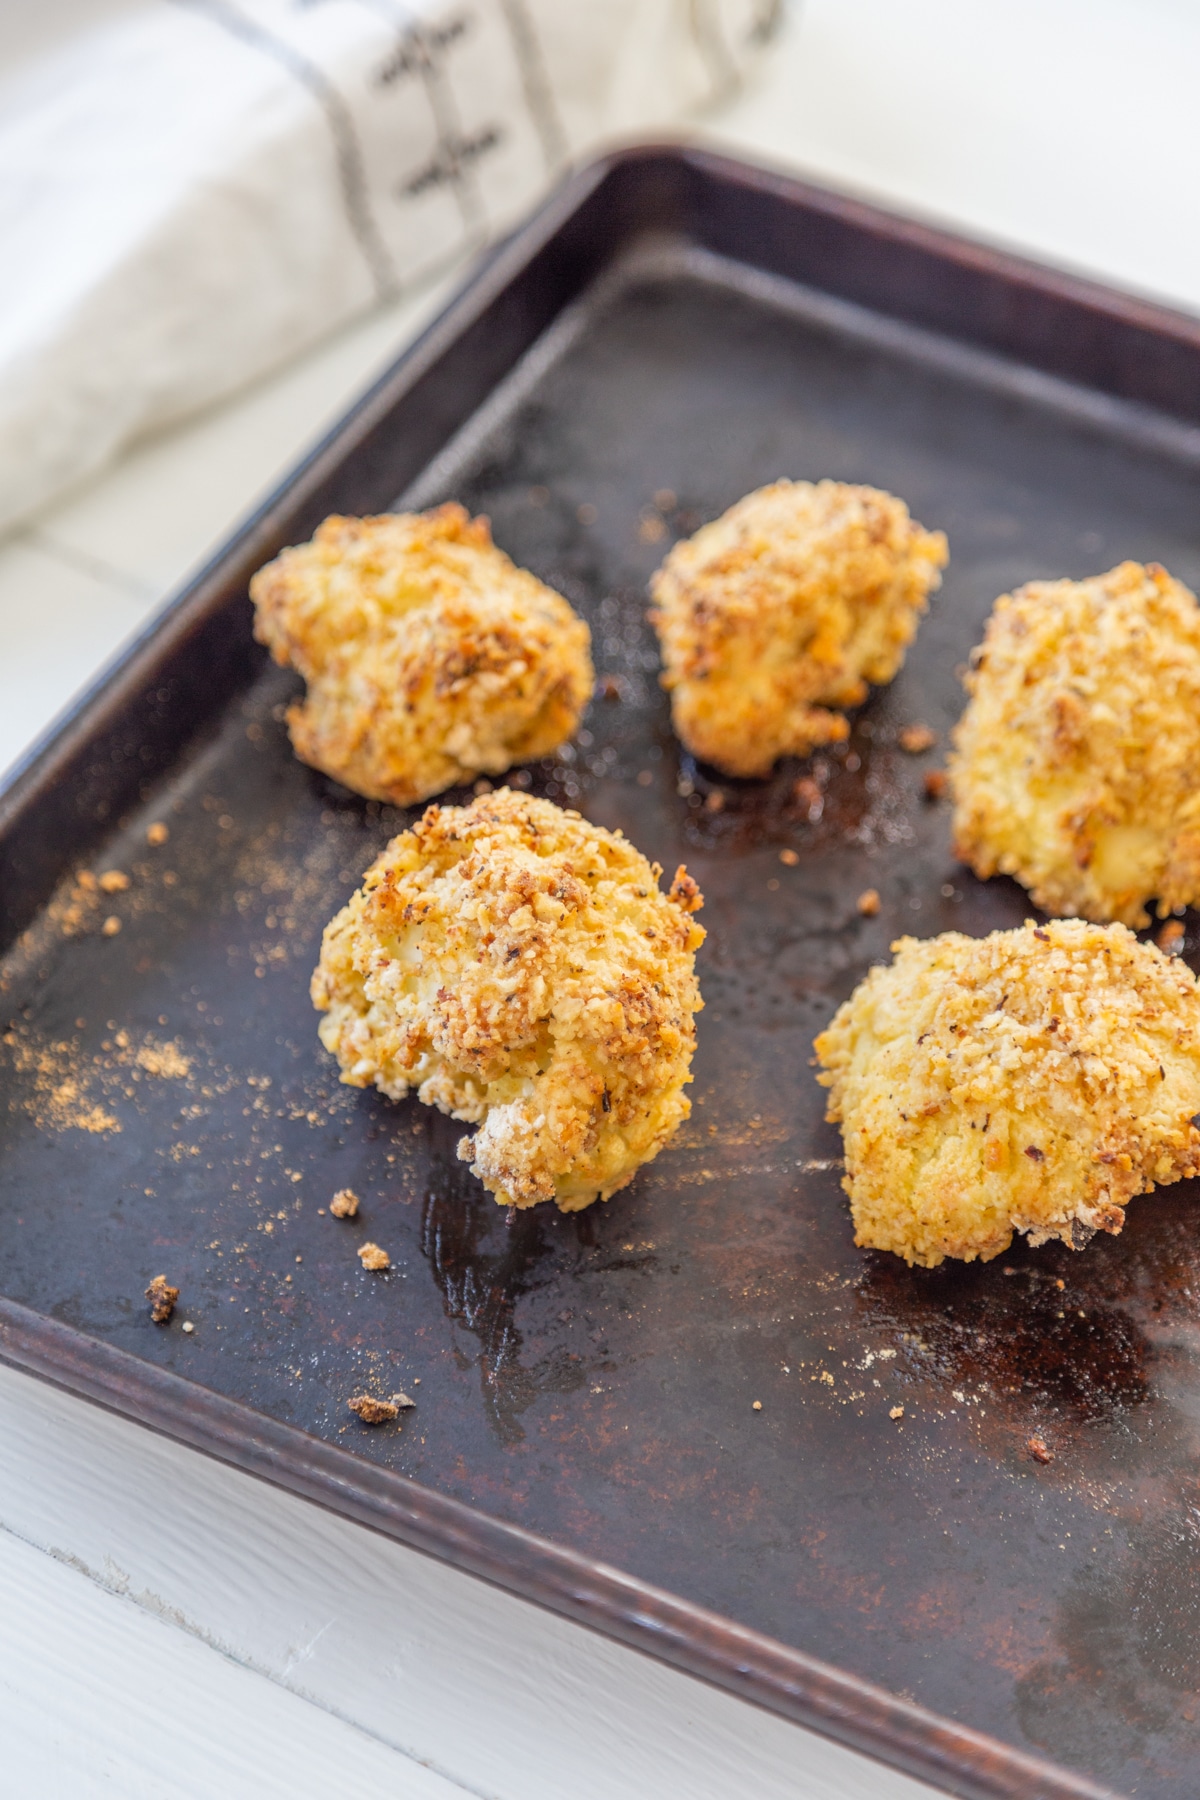 Oven fried breaded cauliflower on a baking sheet with a white and black towel in the background.